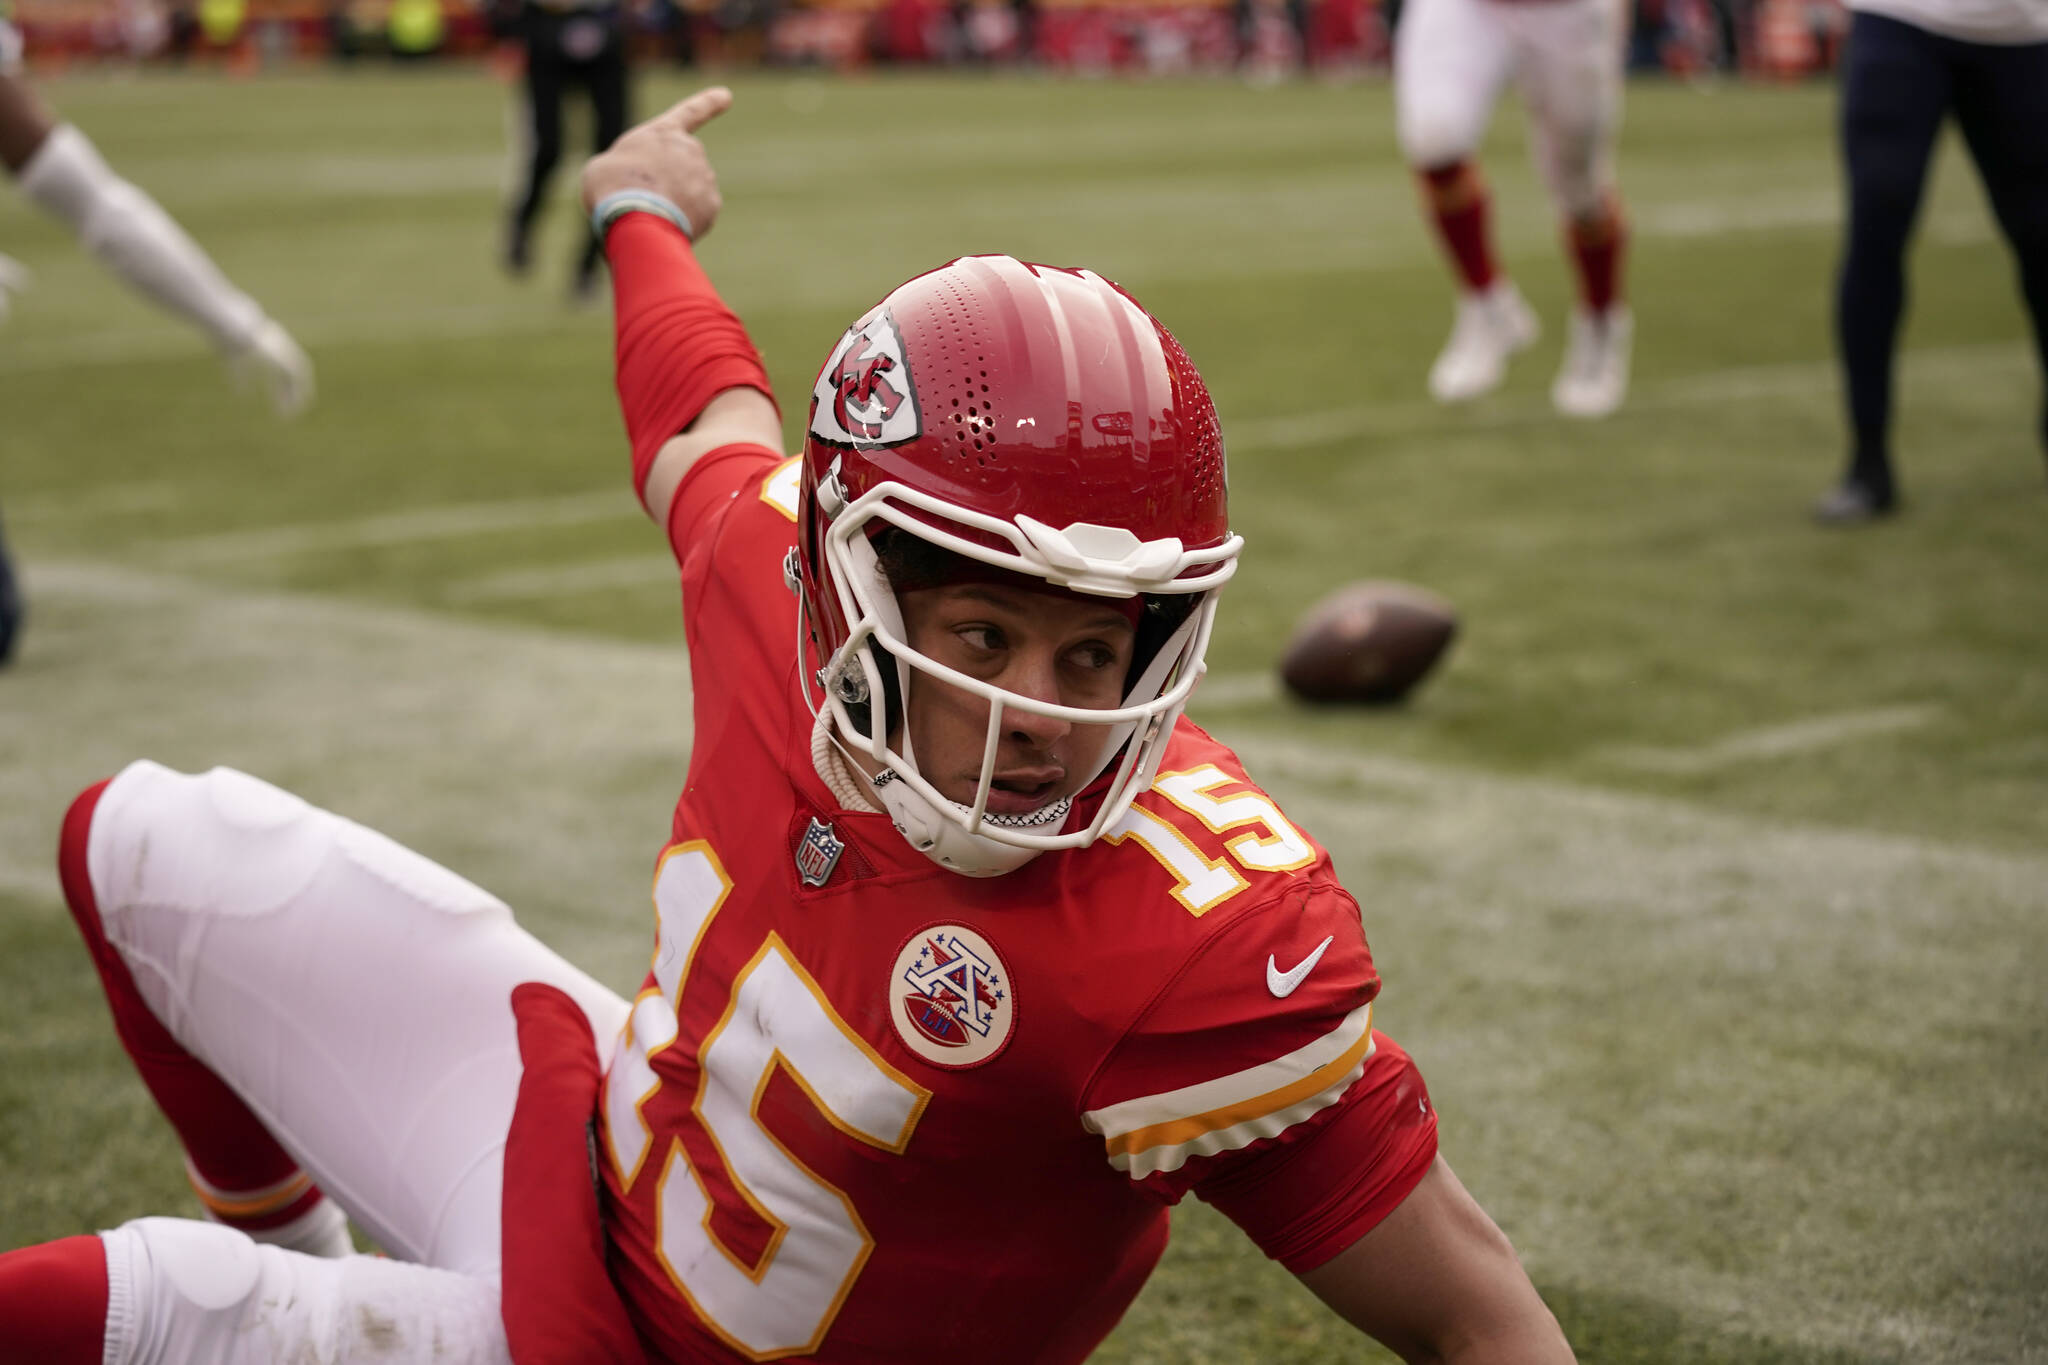 Kansas City Chiefs quarterback Patrick Mahomes celebrates after scoring during the second half of an NFL football game against the Seattle Seahawks Saturday, Dec. 24, 2022, in Kansas City, Mo. (AP Photo/Charlie Riedel)